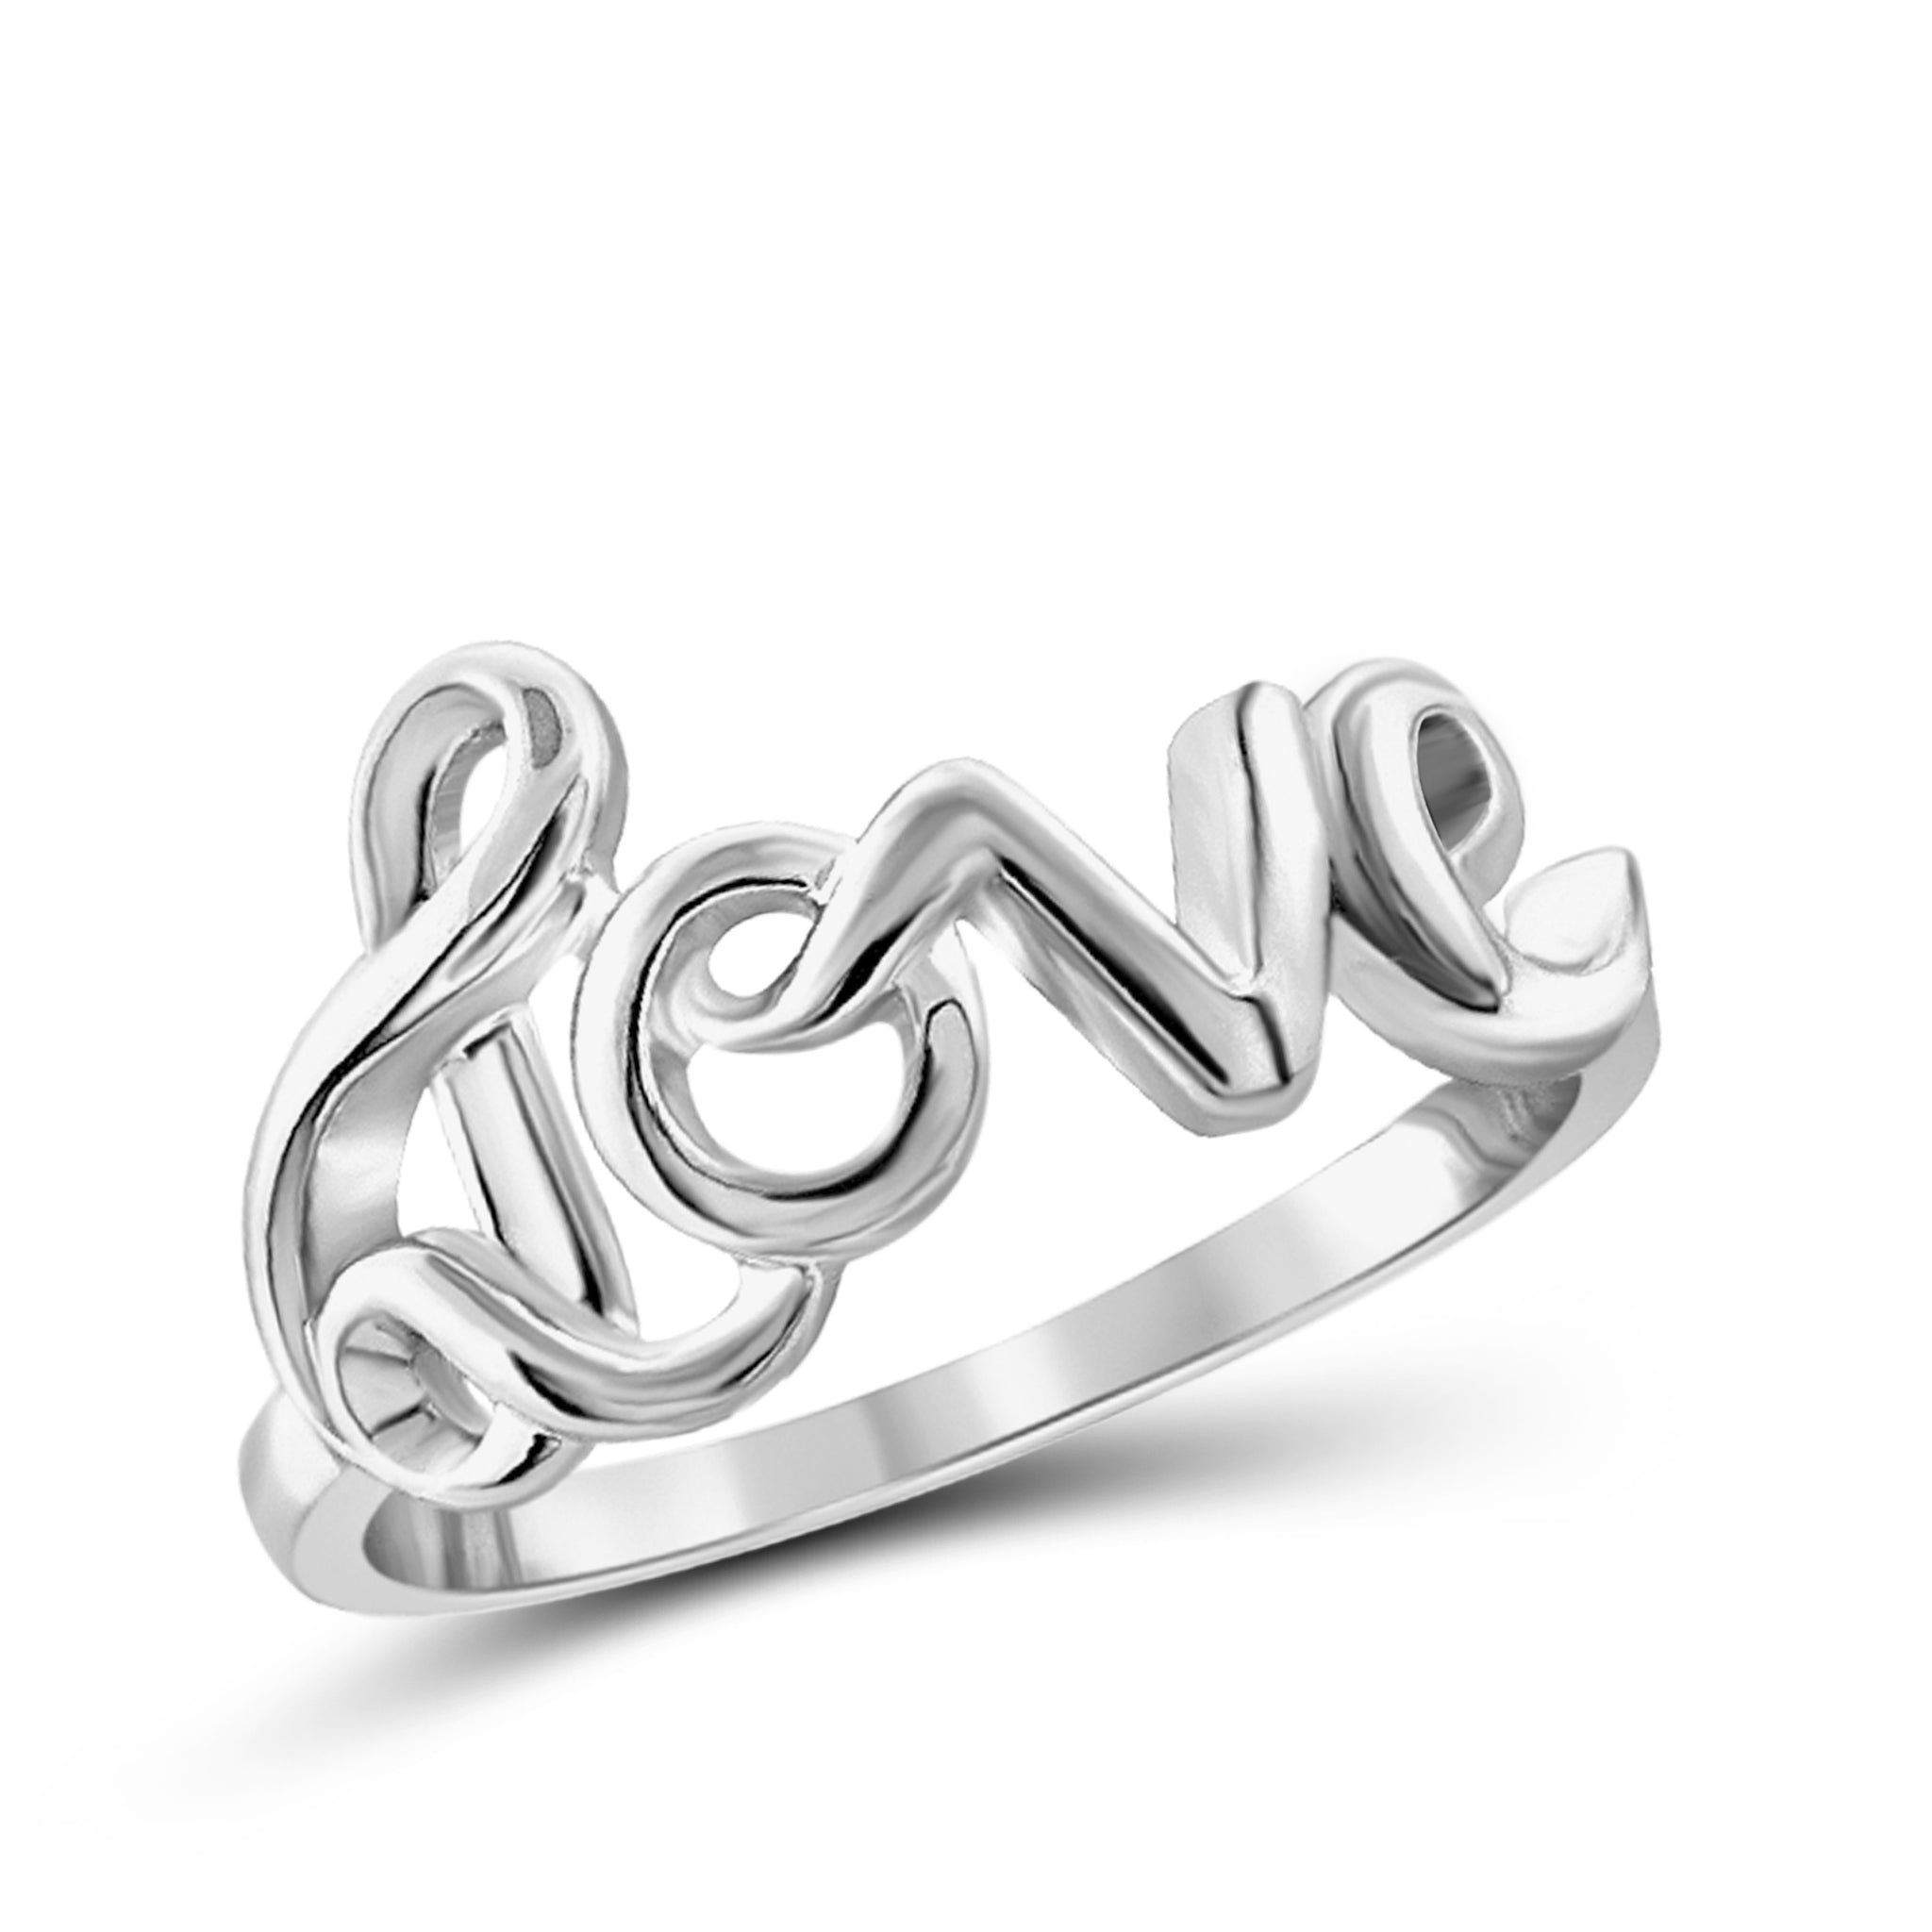 JewelonFire Sterling Silver Enchanting Love Ring - Assorted Colors